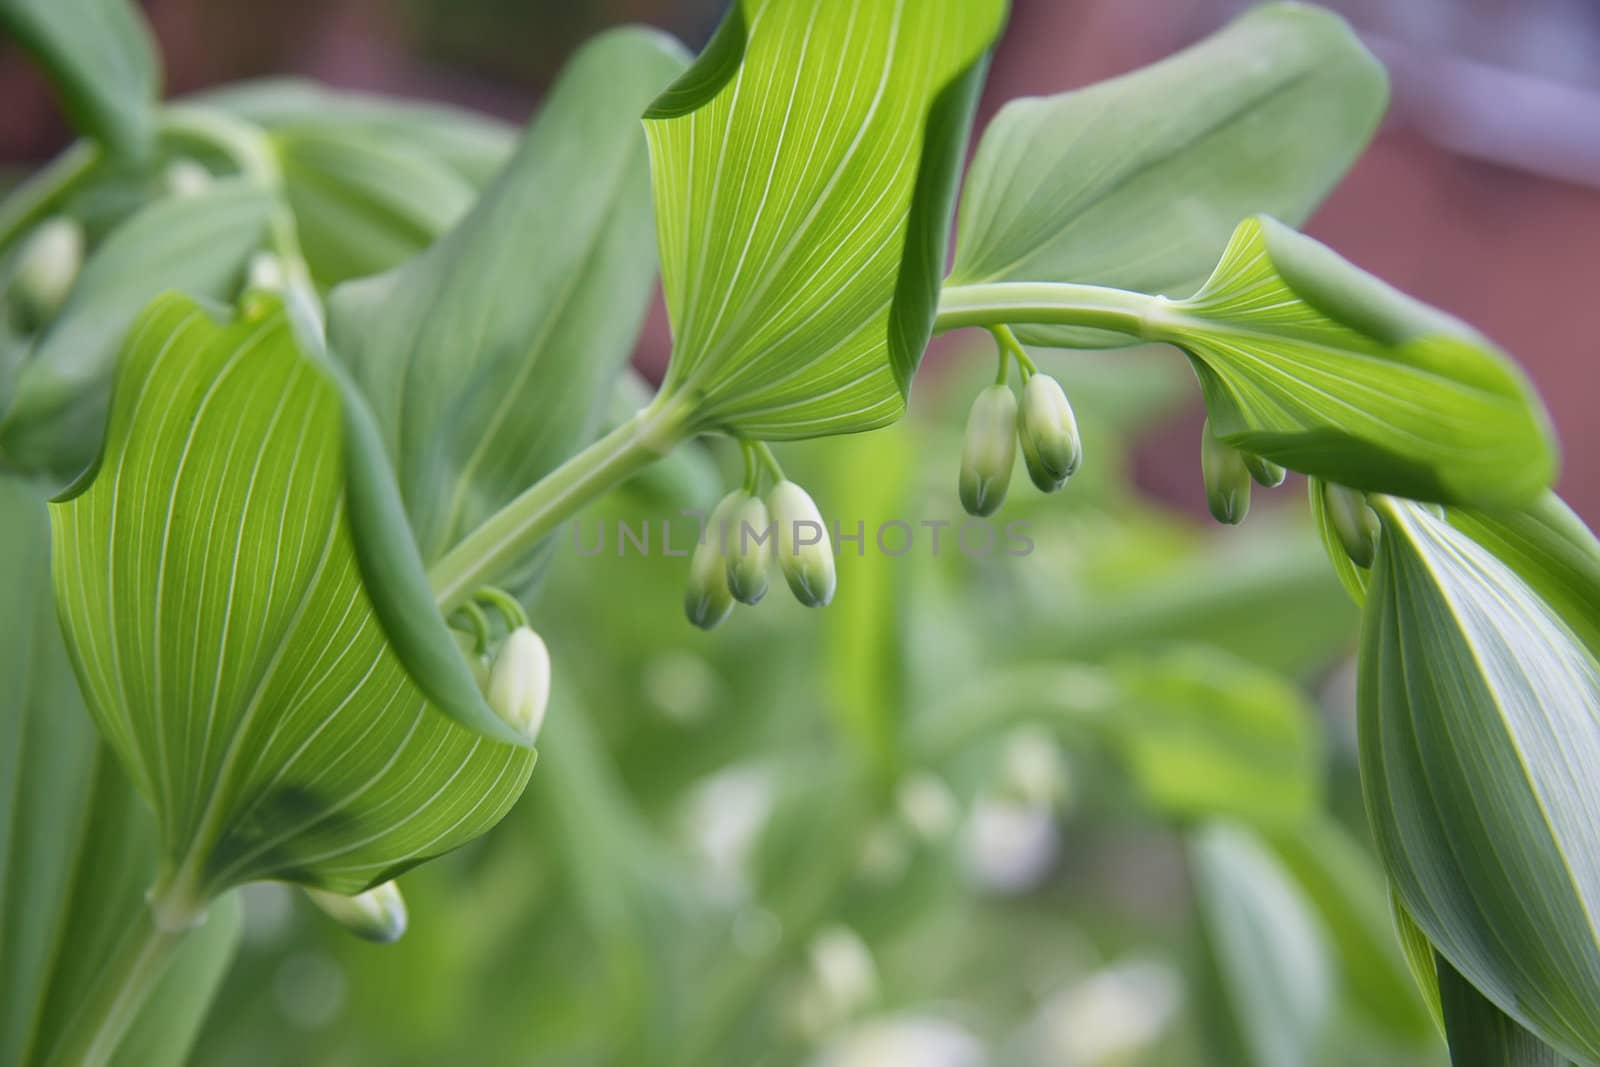 Lily of the valley by snowturtle